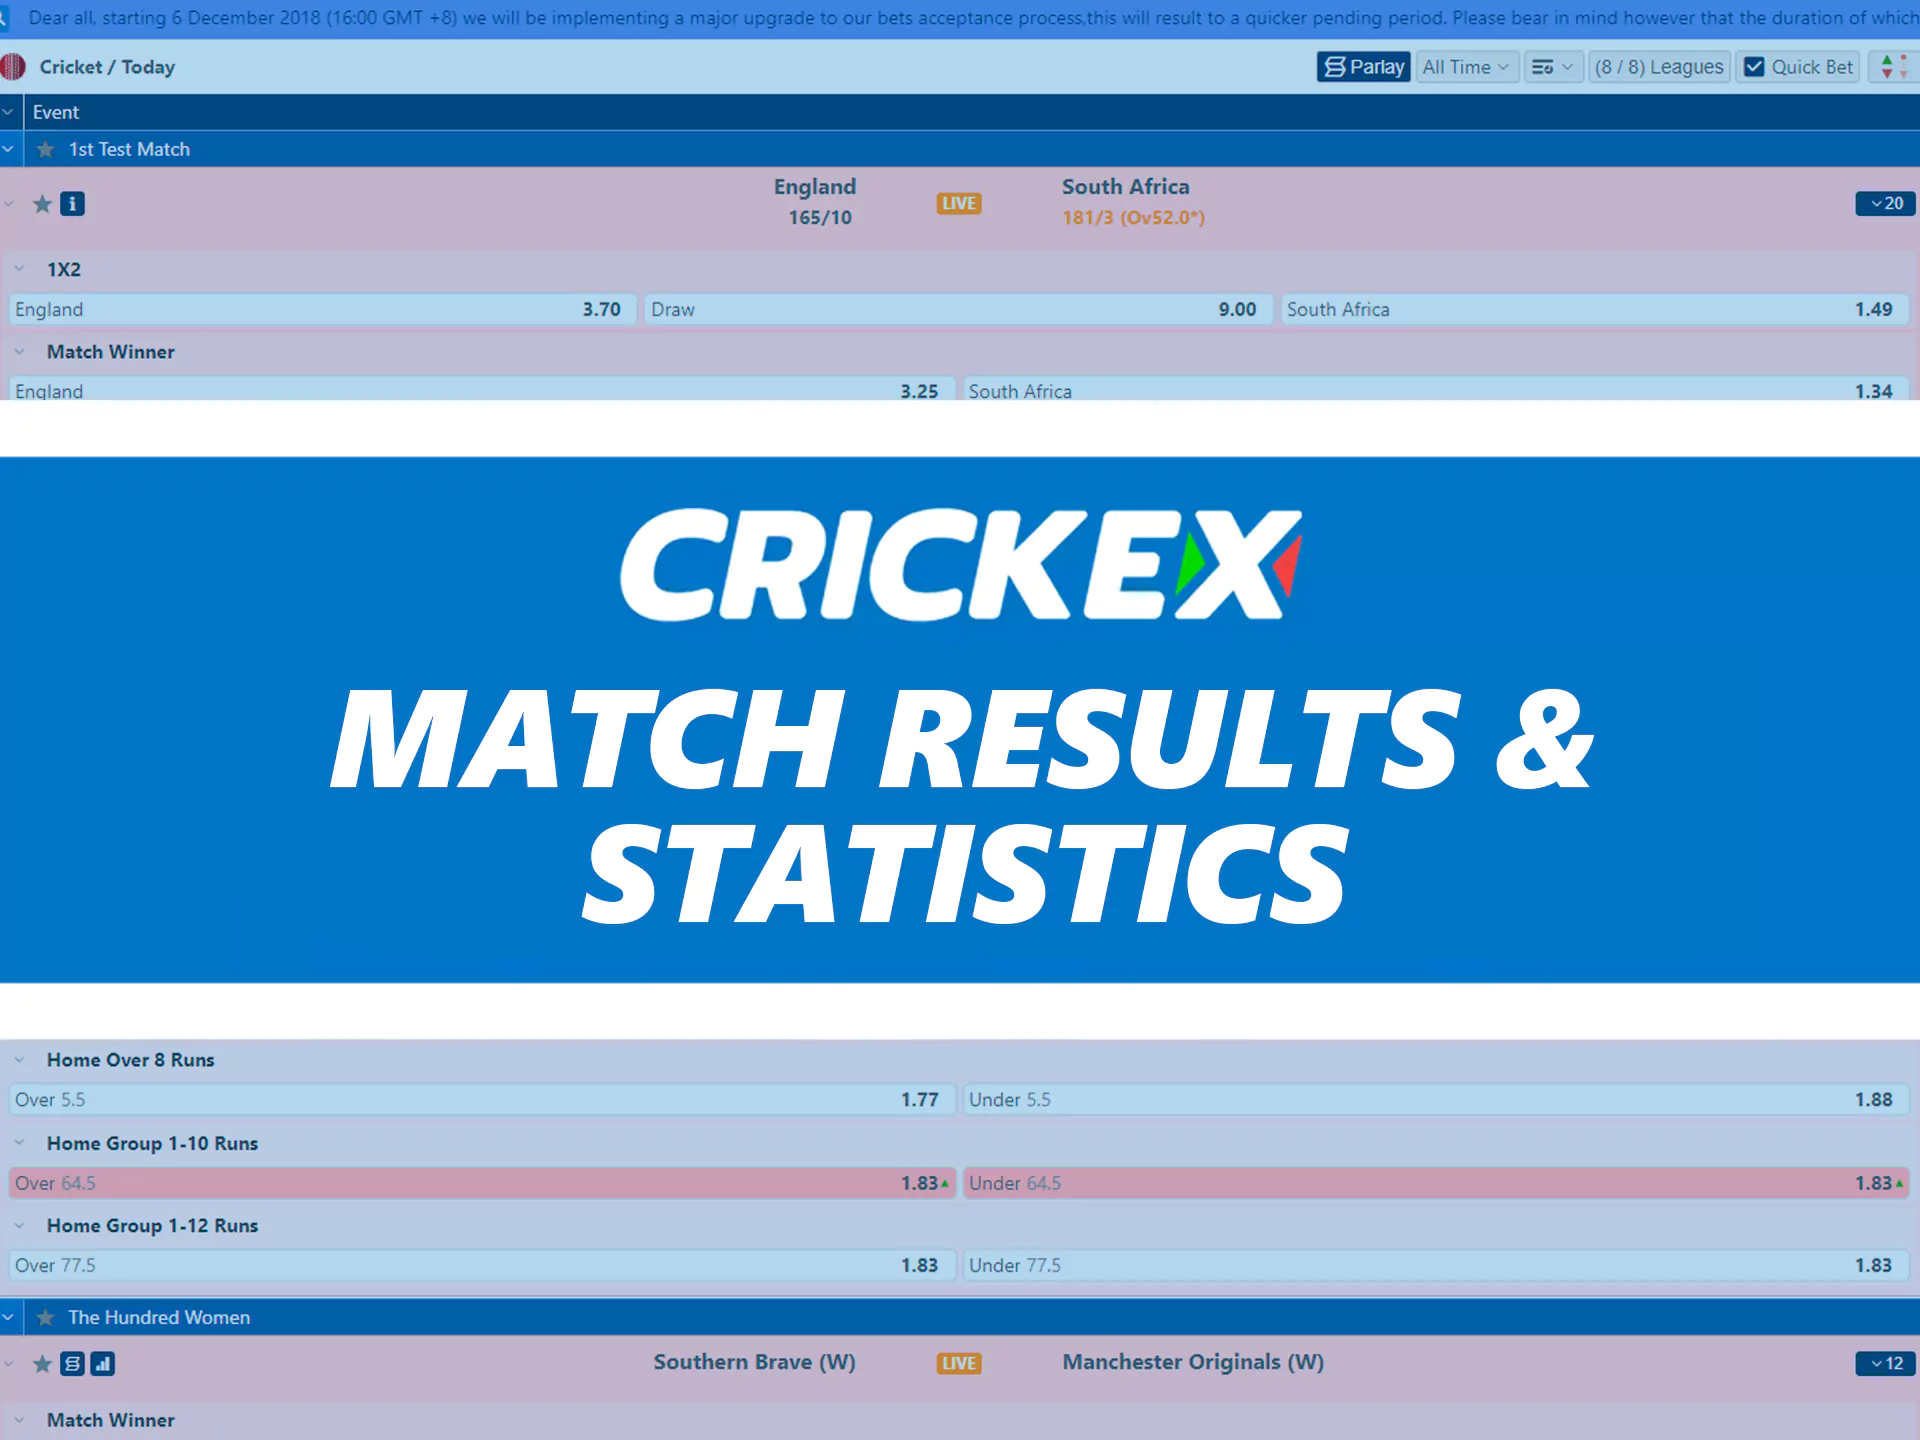 Crickex offers detailed betting statistics and match results.